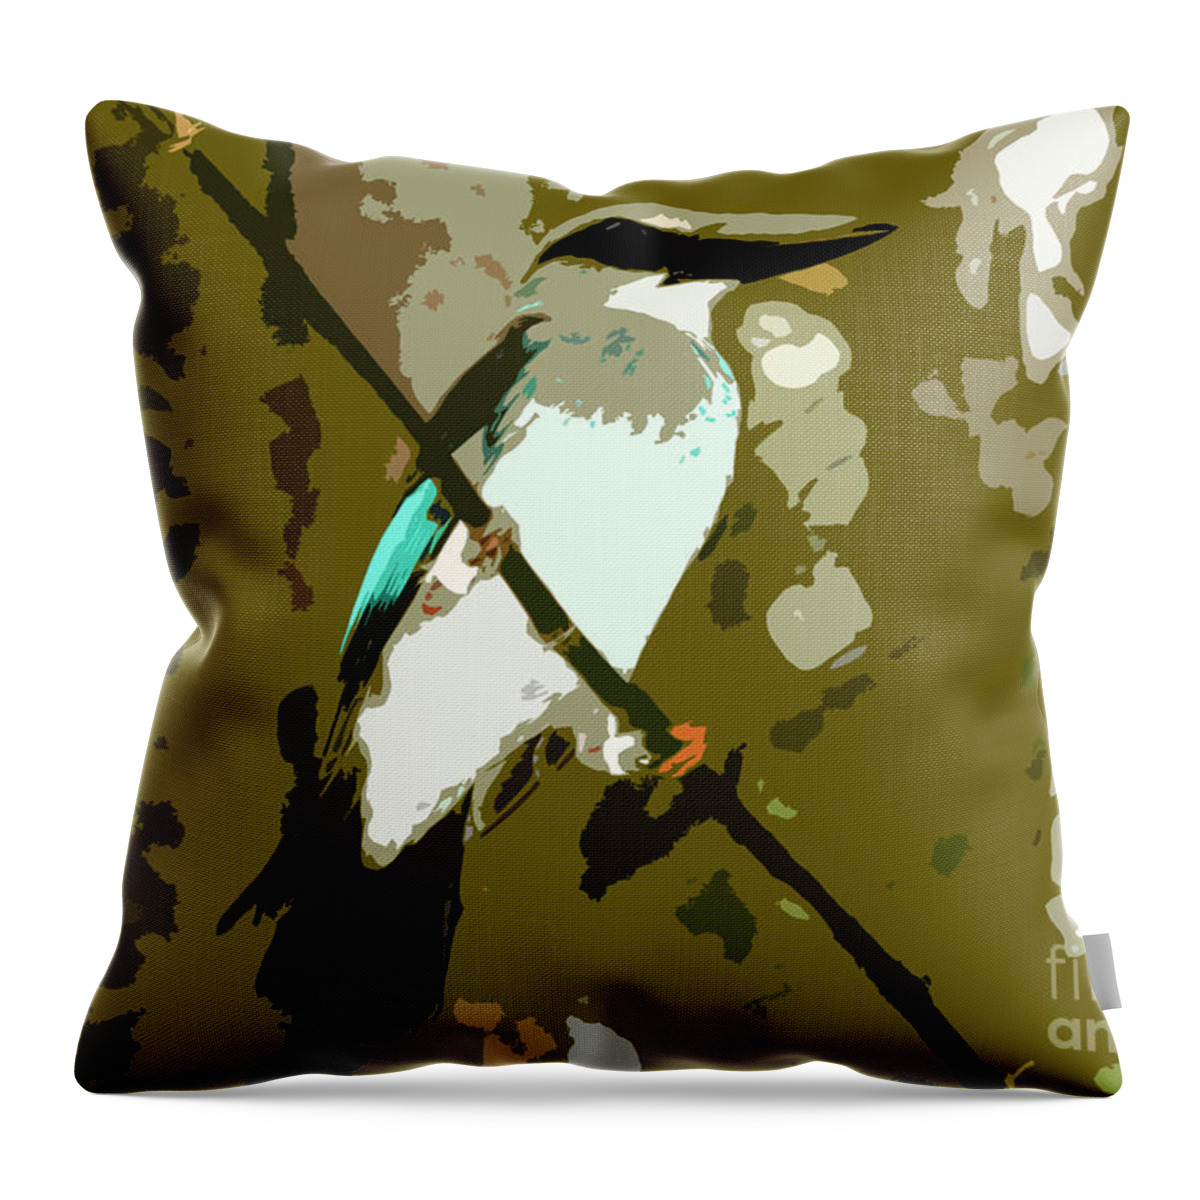 Fisher King Throw Pillow featuring the photograph Fisher King by David Lee Thompson